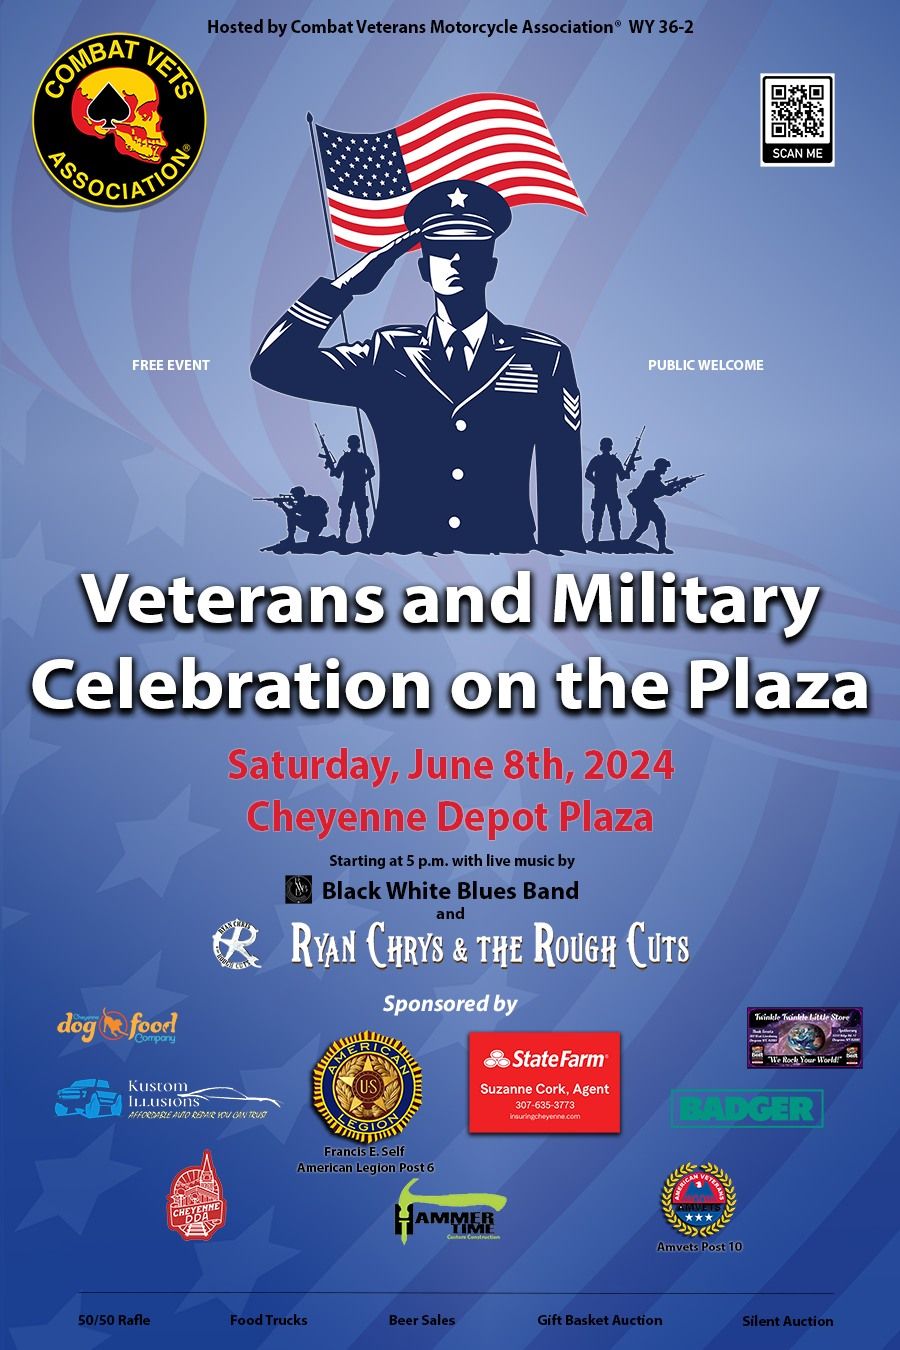 Veterans and Military Celebration on the Plaza